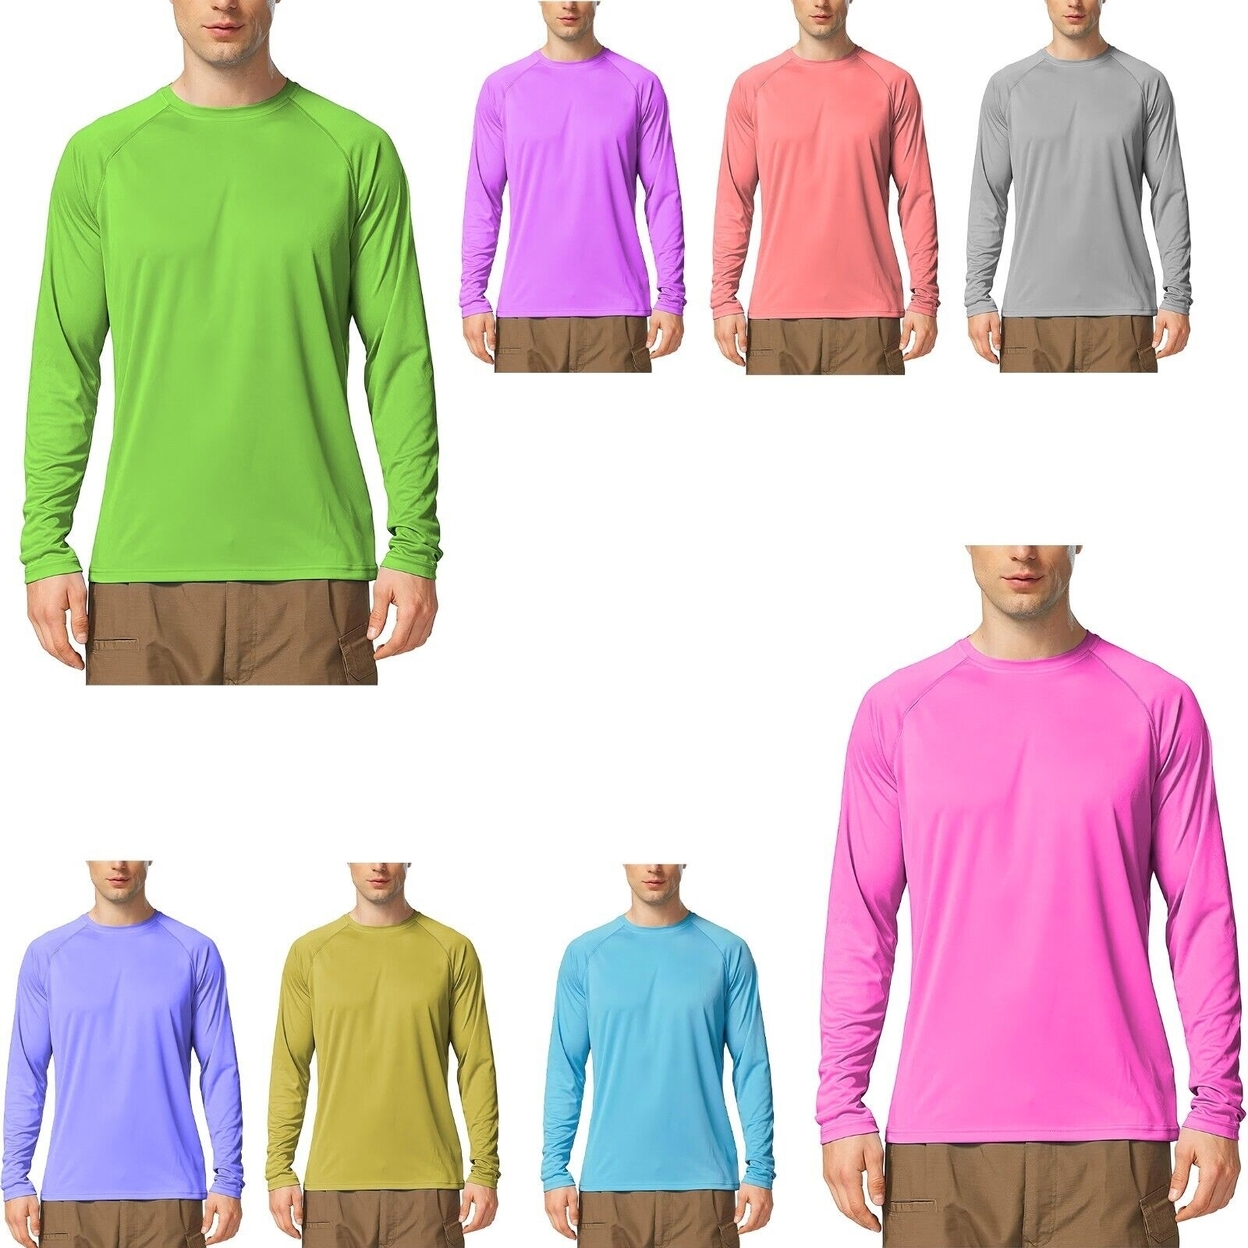 6-Pack: Men's Dri-Fit Moisture Wicking Athletic Cool Performance Slim Fit Long Sleeve T-Shirts - X-large